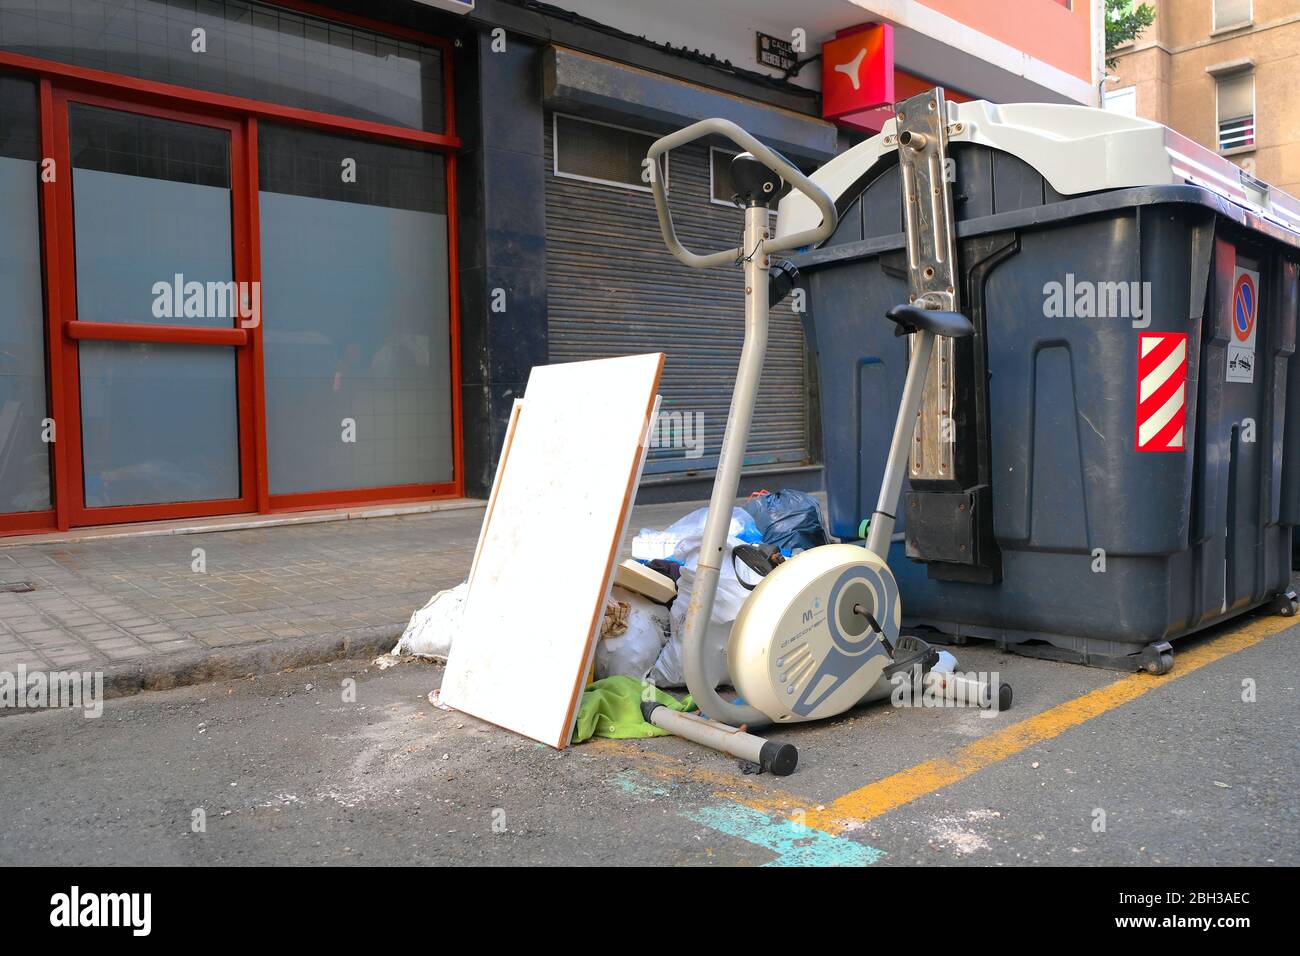 Discarded gym equipment, consumptionism and garbage disposal in a big city. Stock Photo